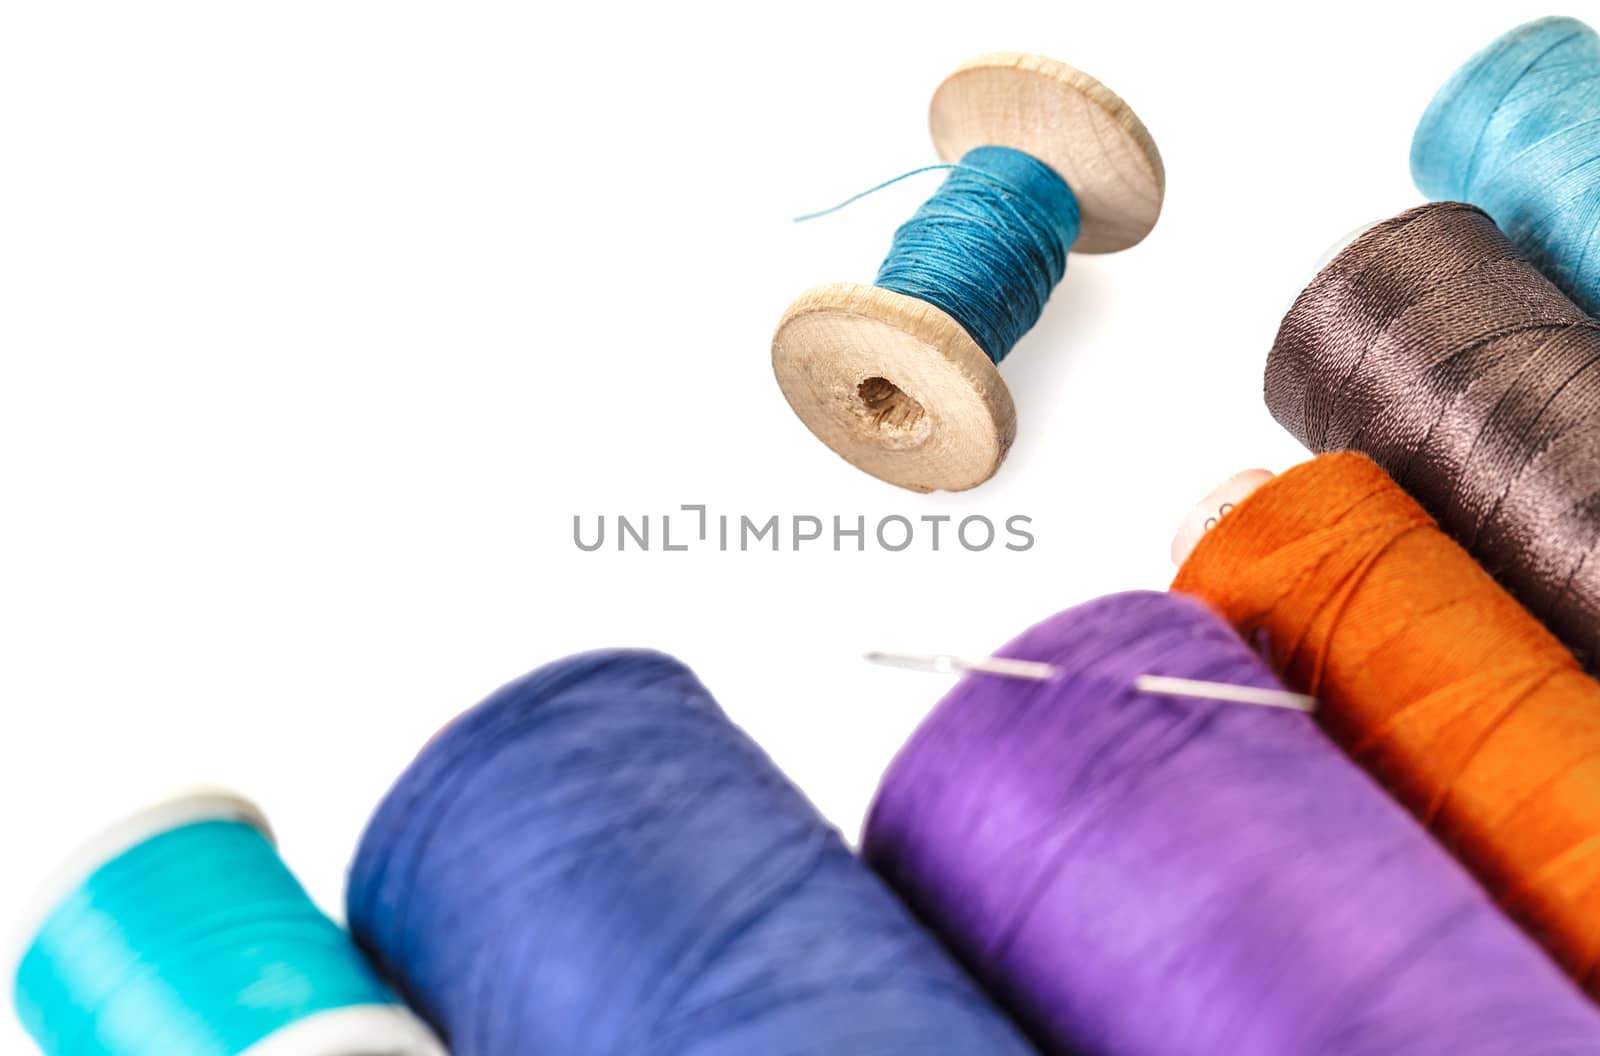 spools of colorful threads on a white background